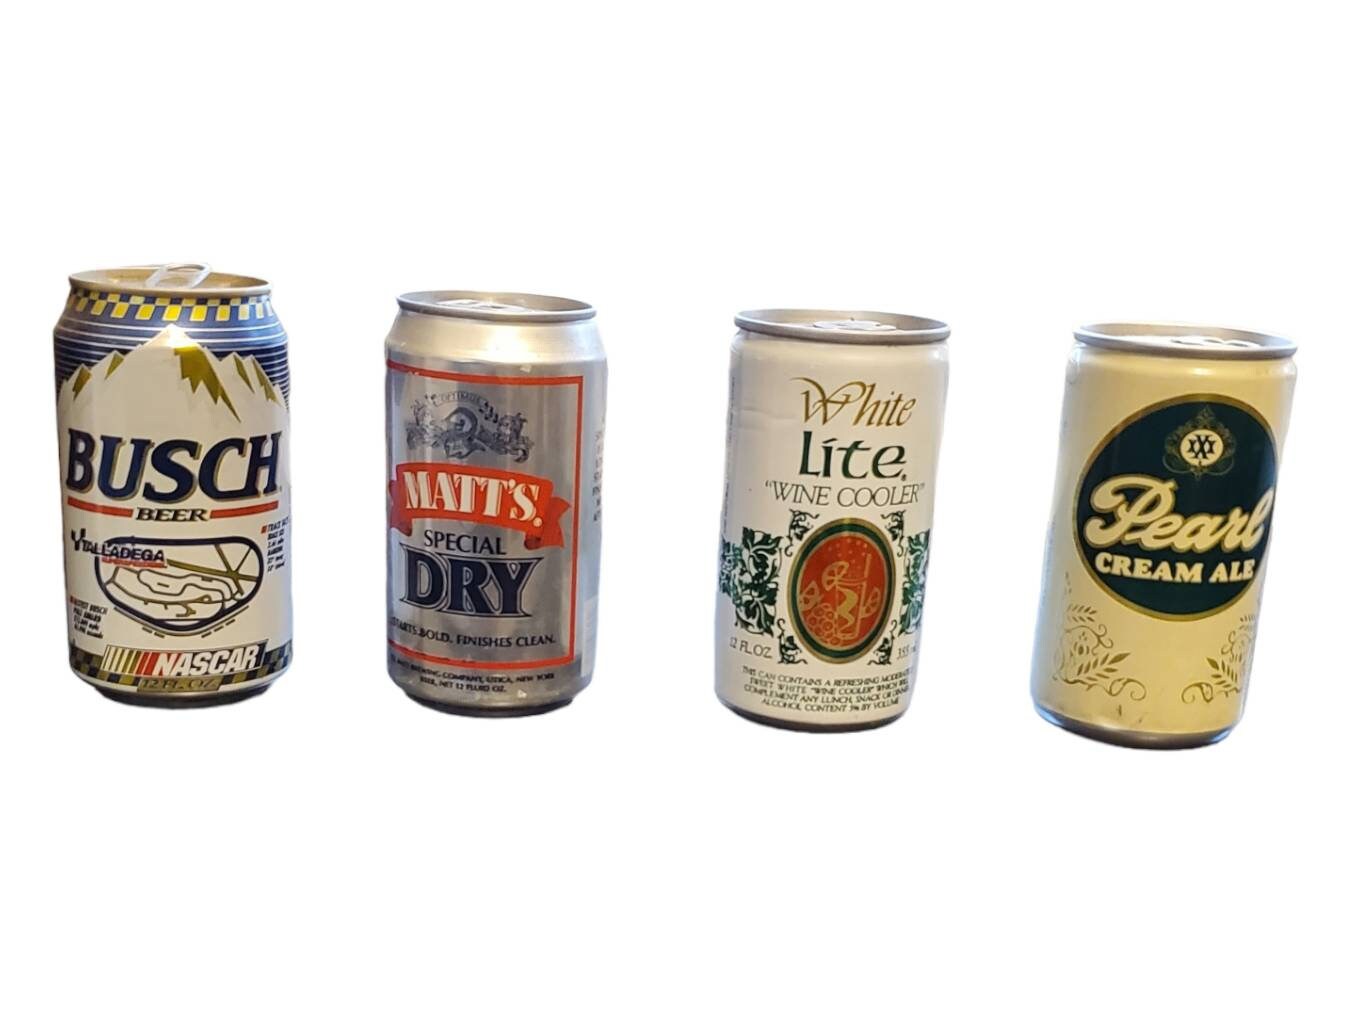 Vintage Beer Can Lot // Lot of 4 // Rusty Dusty Old Cans // Decor Mancave  // Busch Beer Matt's Special Dry White Lite Wine Cooler Pearl 192 -   Canada